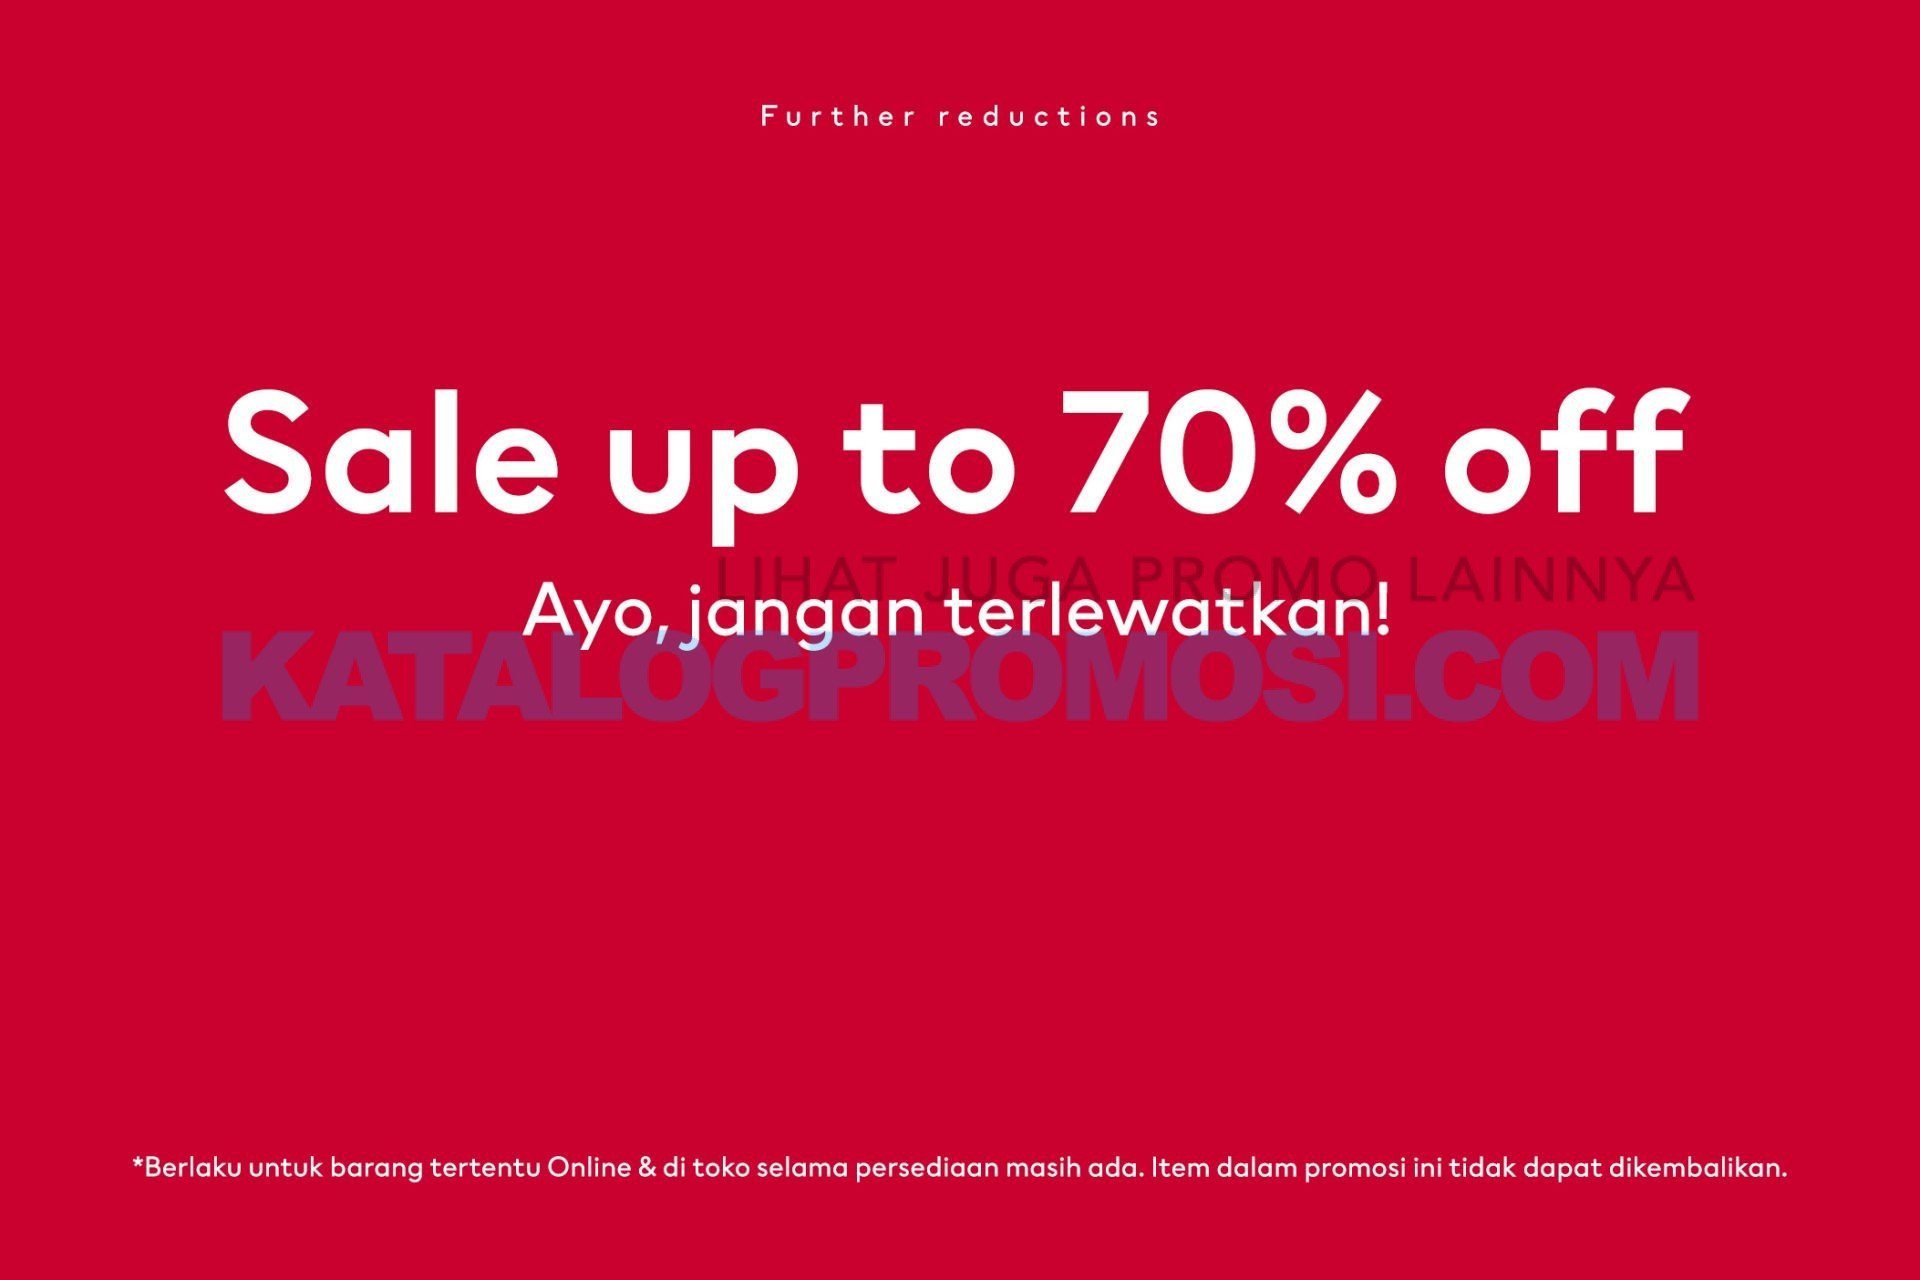 PROMO H&M END OF SEASON SALE FURTHER REDUCTION DISCOUNT up to 70% Off